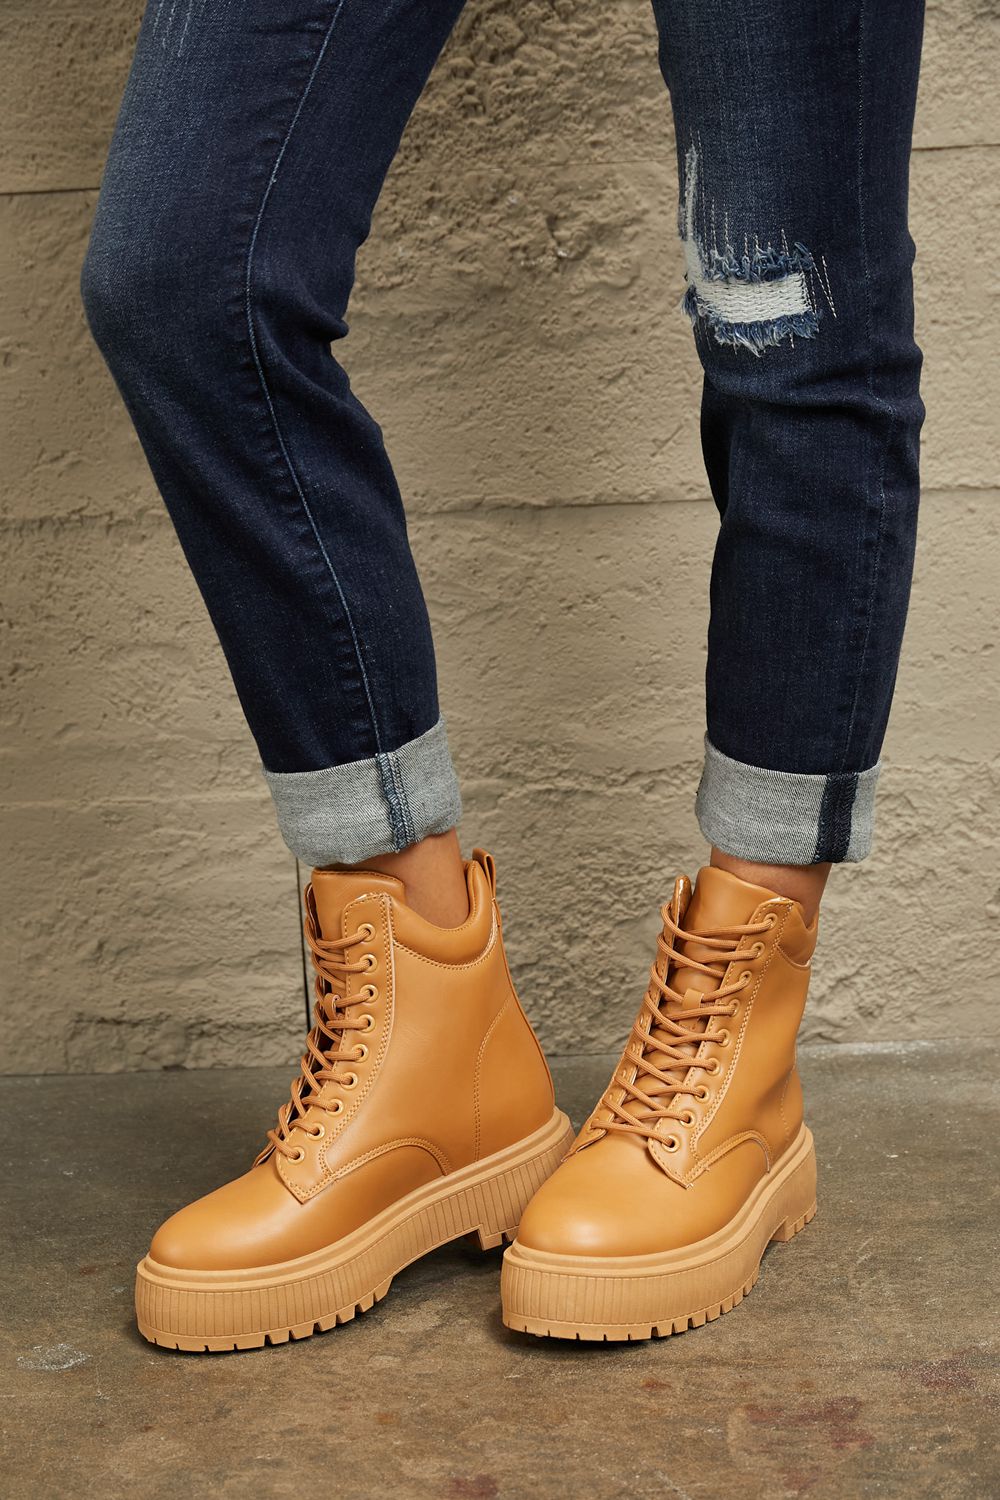 East Lion Corp Platform Combat Chunky Thick Sole Caramel Tan Lace Up Bootie Boots